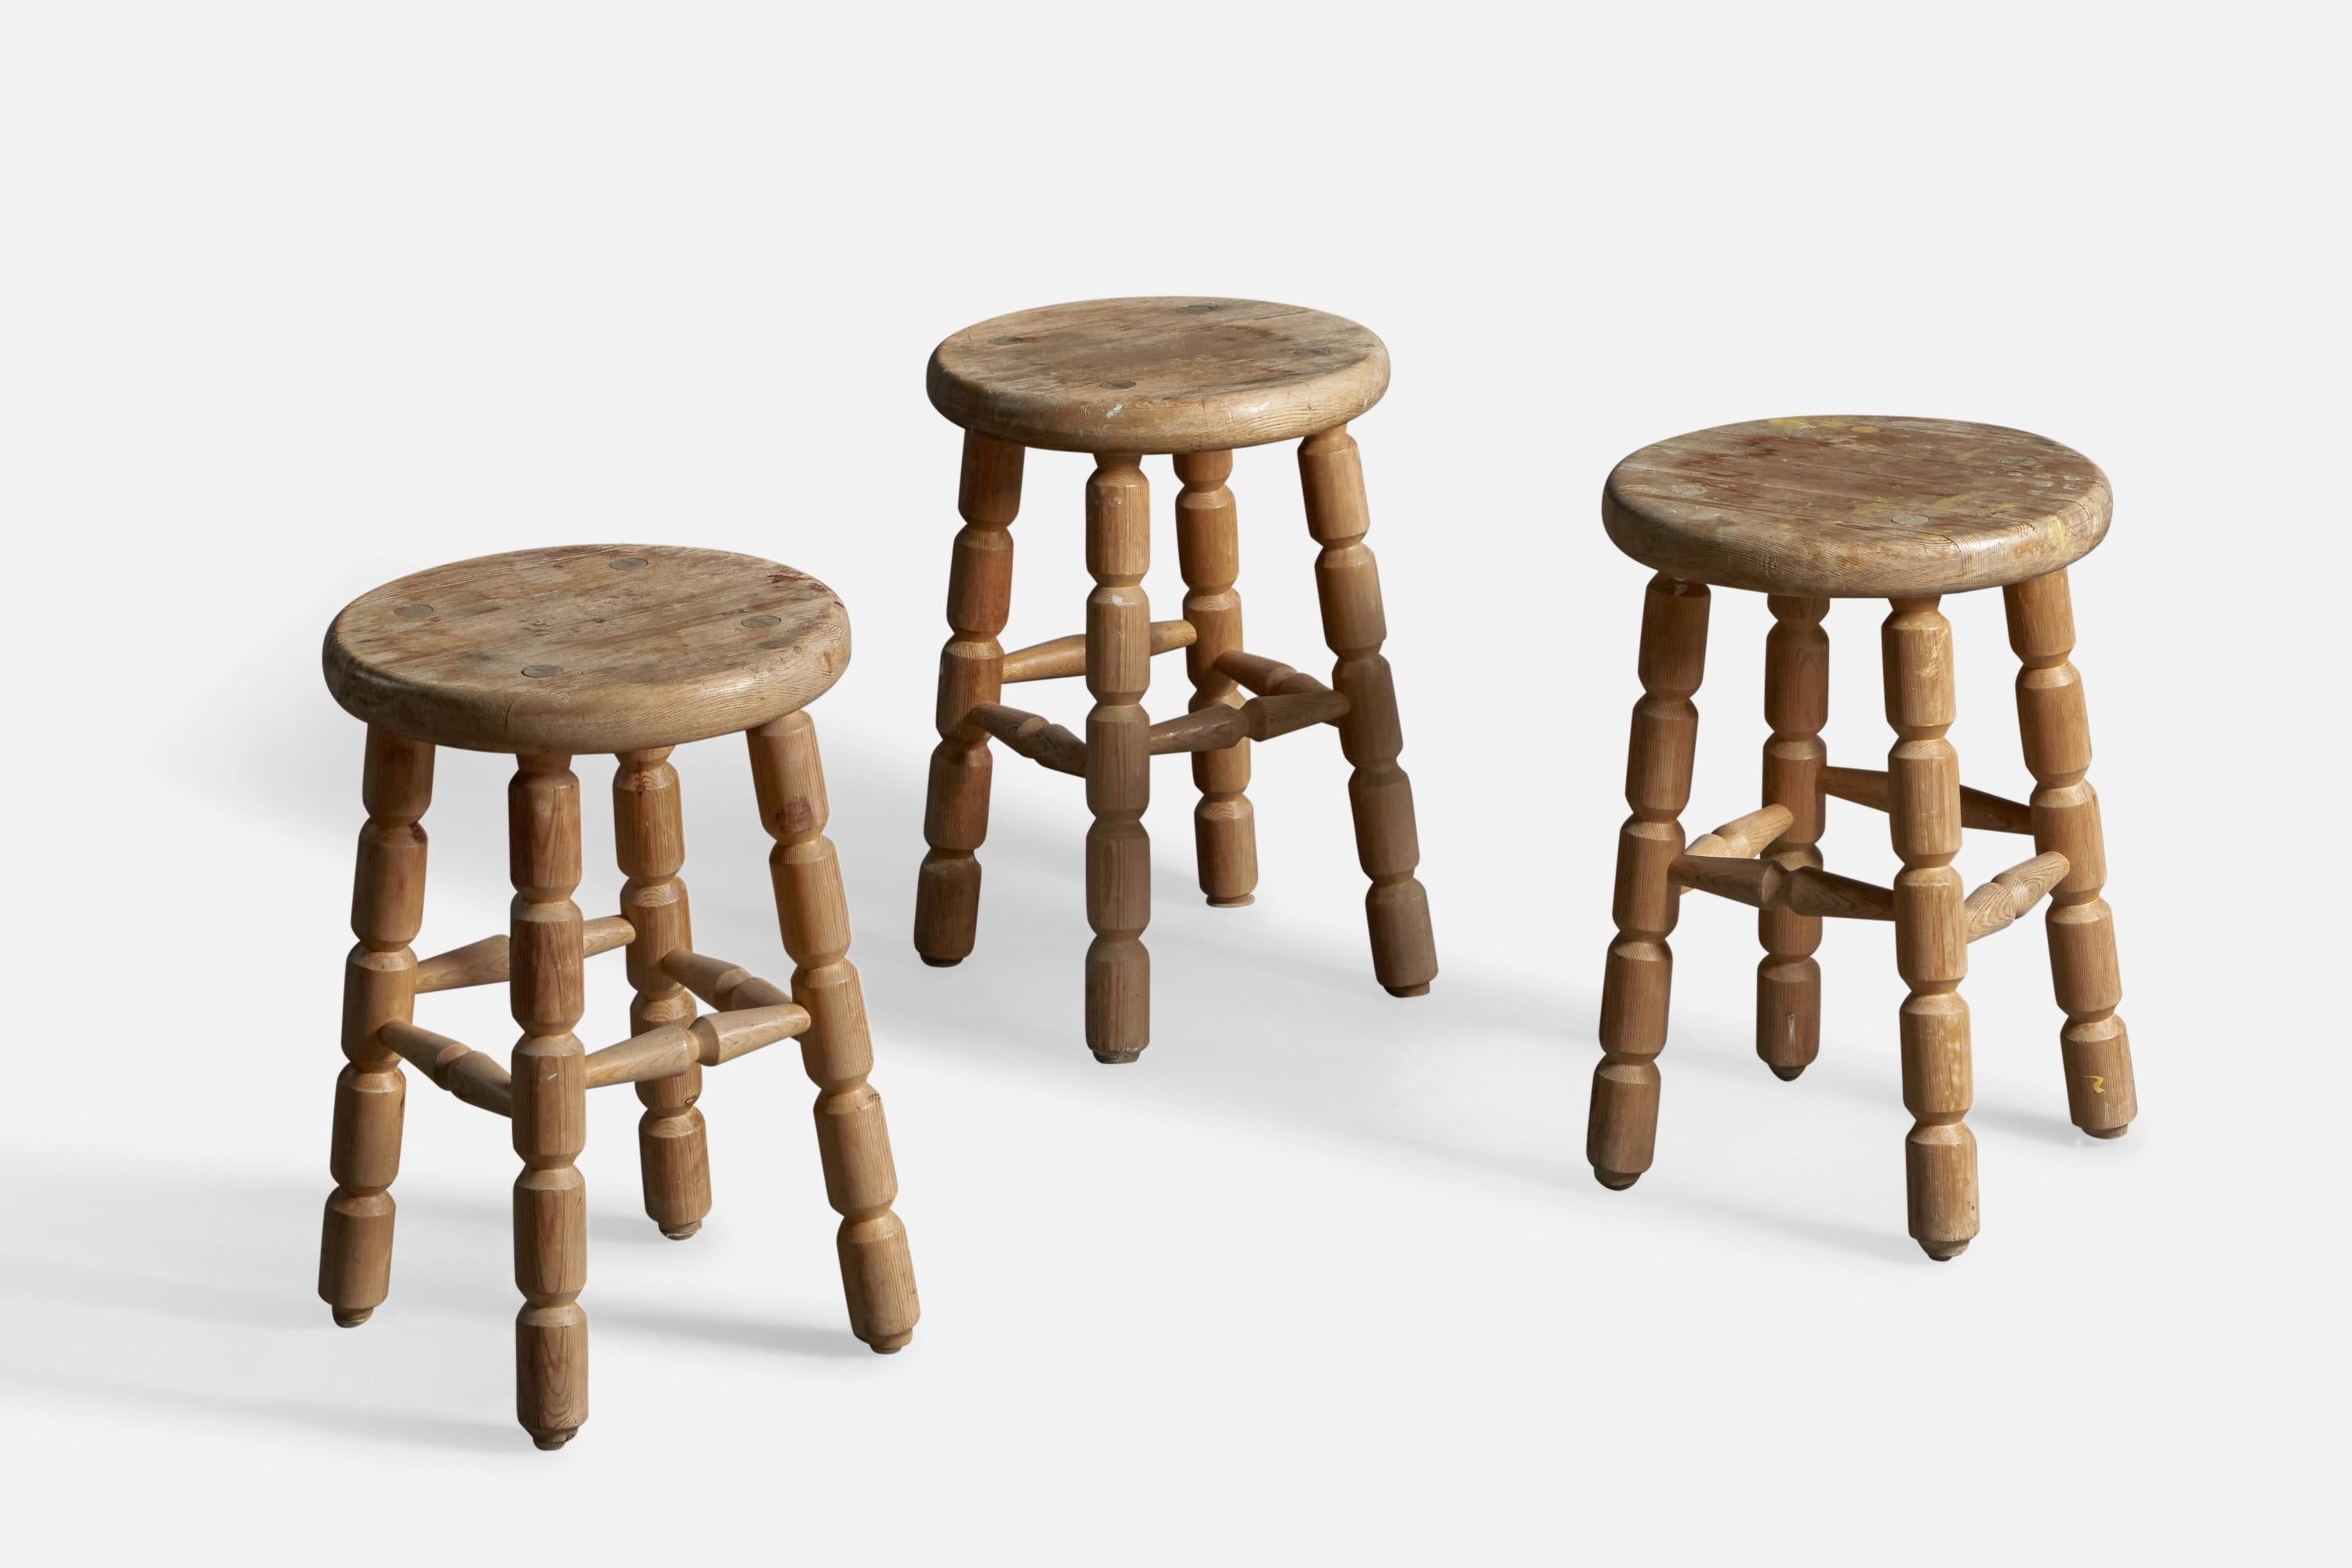 A set of 3 solid pine stools, designed and produced in Sweden, c. 1960s.